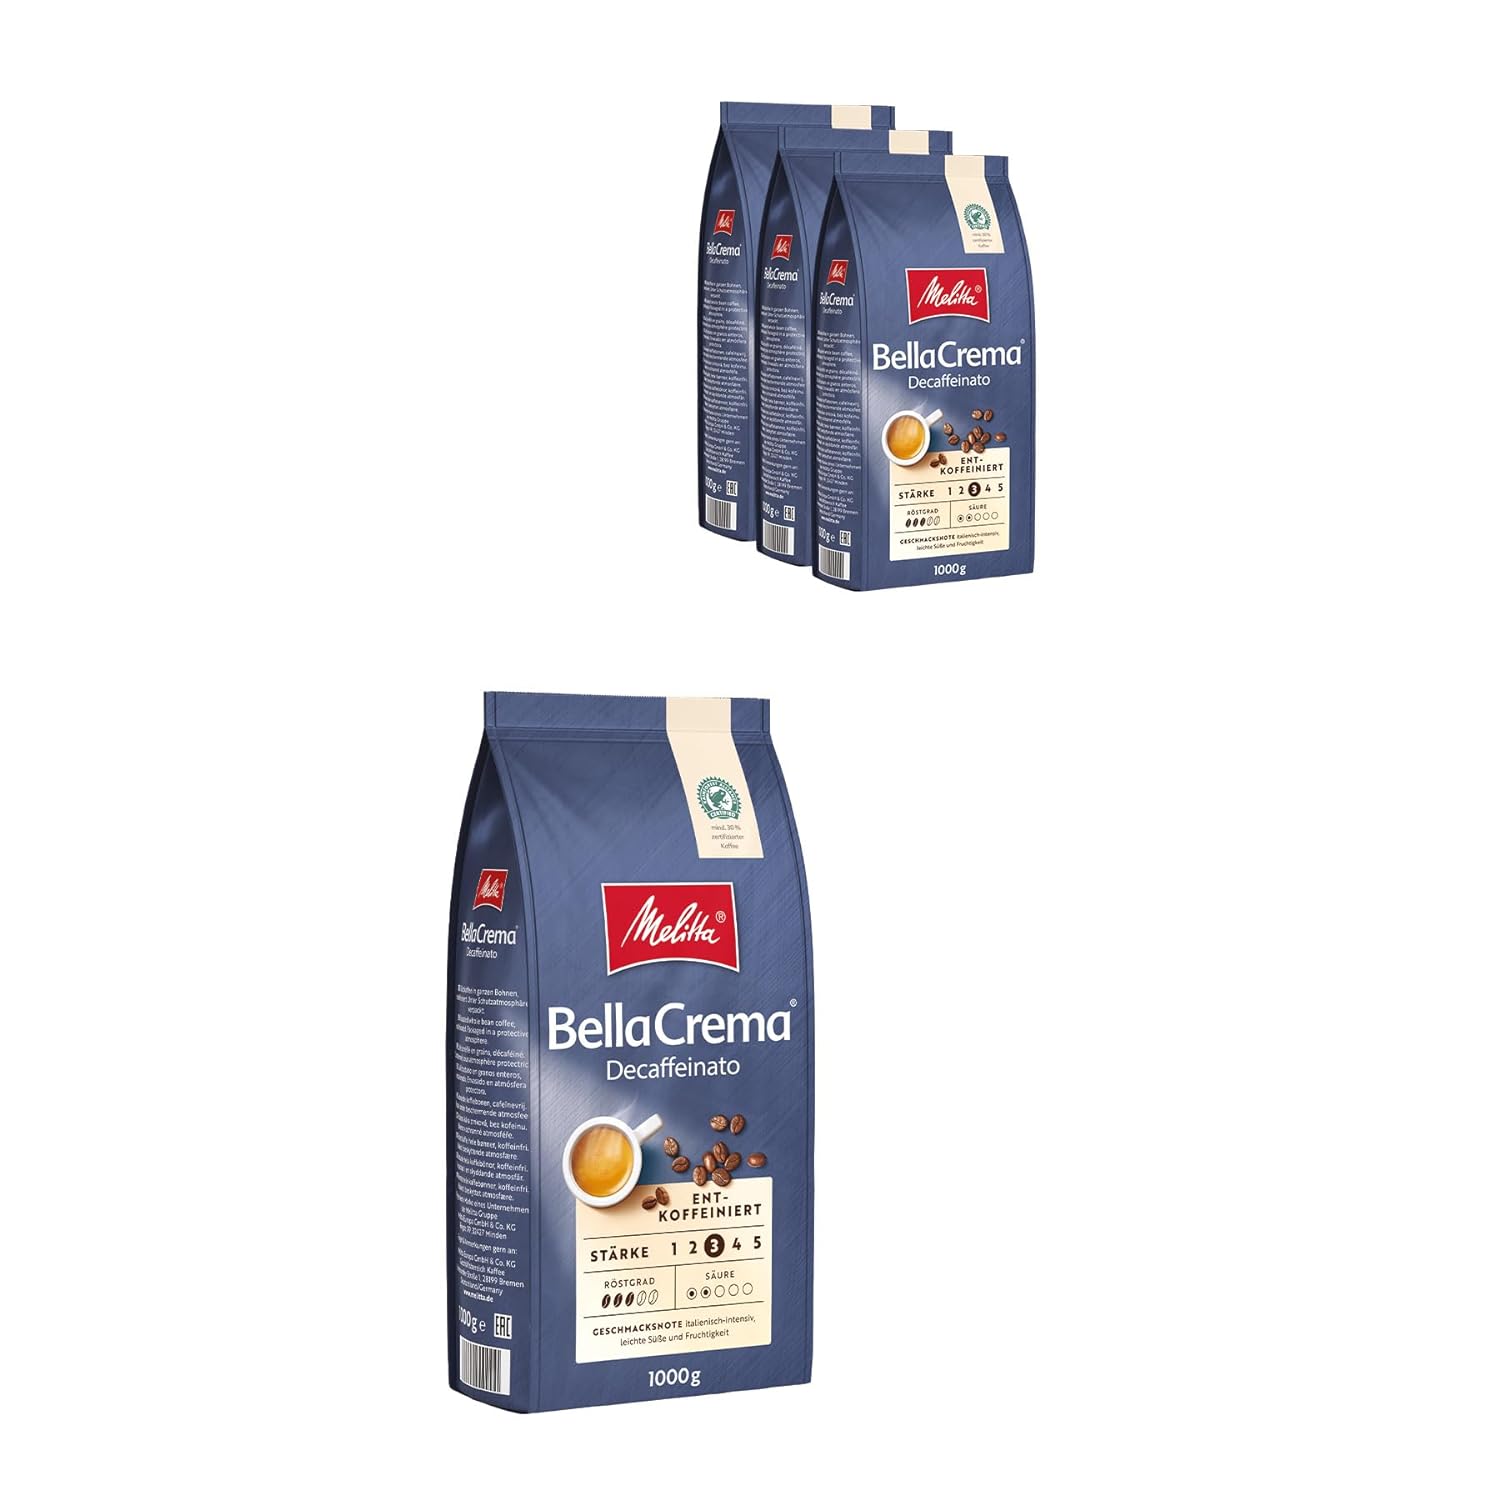 Melitta Bellacrema Decaffeinato entire coffee beans decaffeinated 4 x 1kg, uncomfortable, coffee beans for fully automatic coffee machine, caffeine-free, mild roasting, roasted in Germany, strength 3